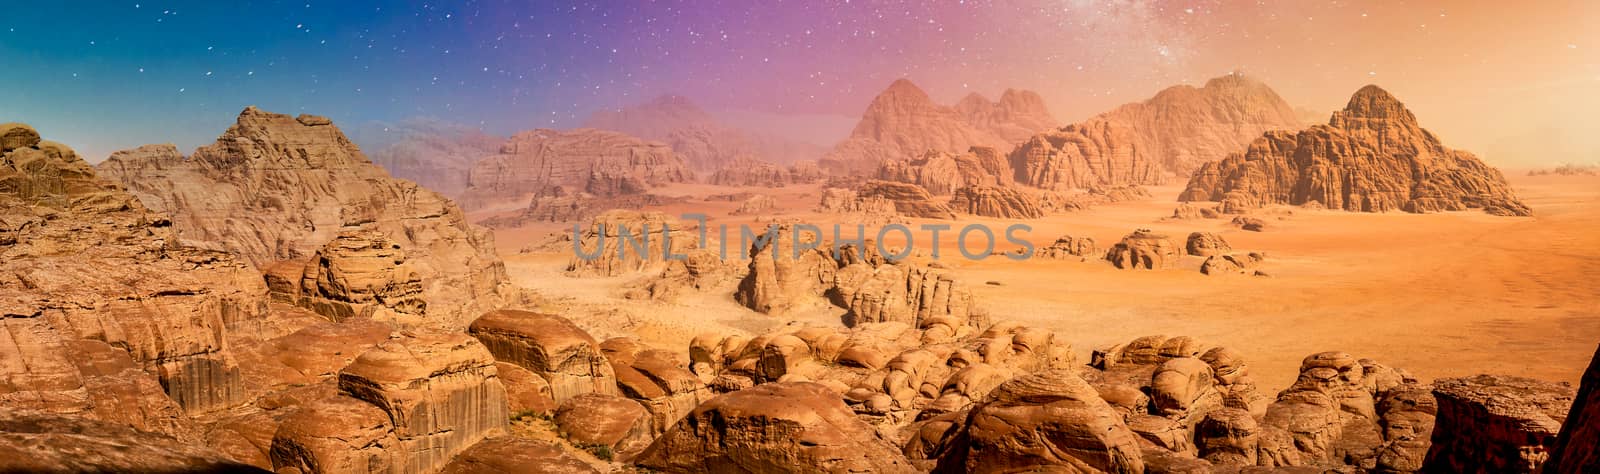 Desert and rocks on extraterrestrial or alien planet in the universe with view on space and galaxy. Sci-fi.